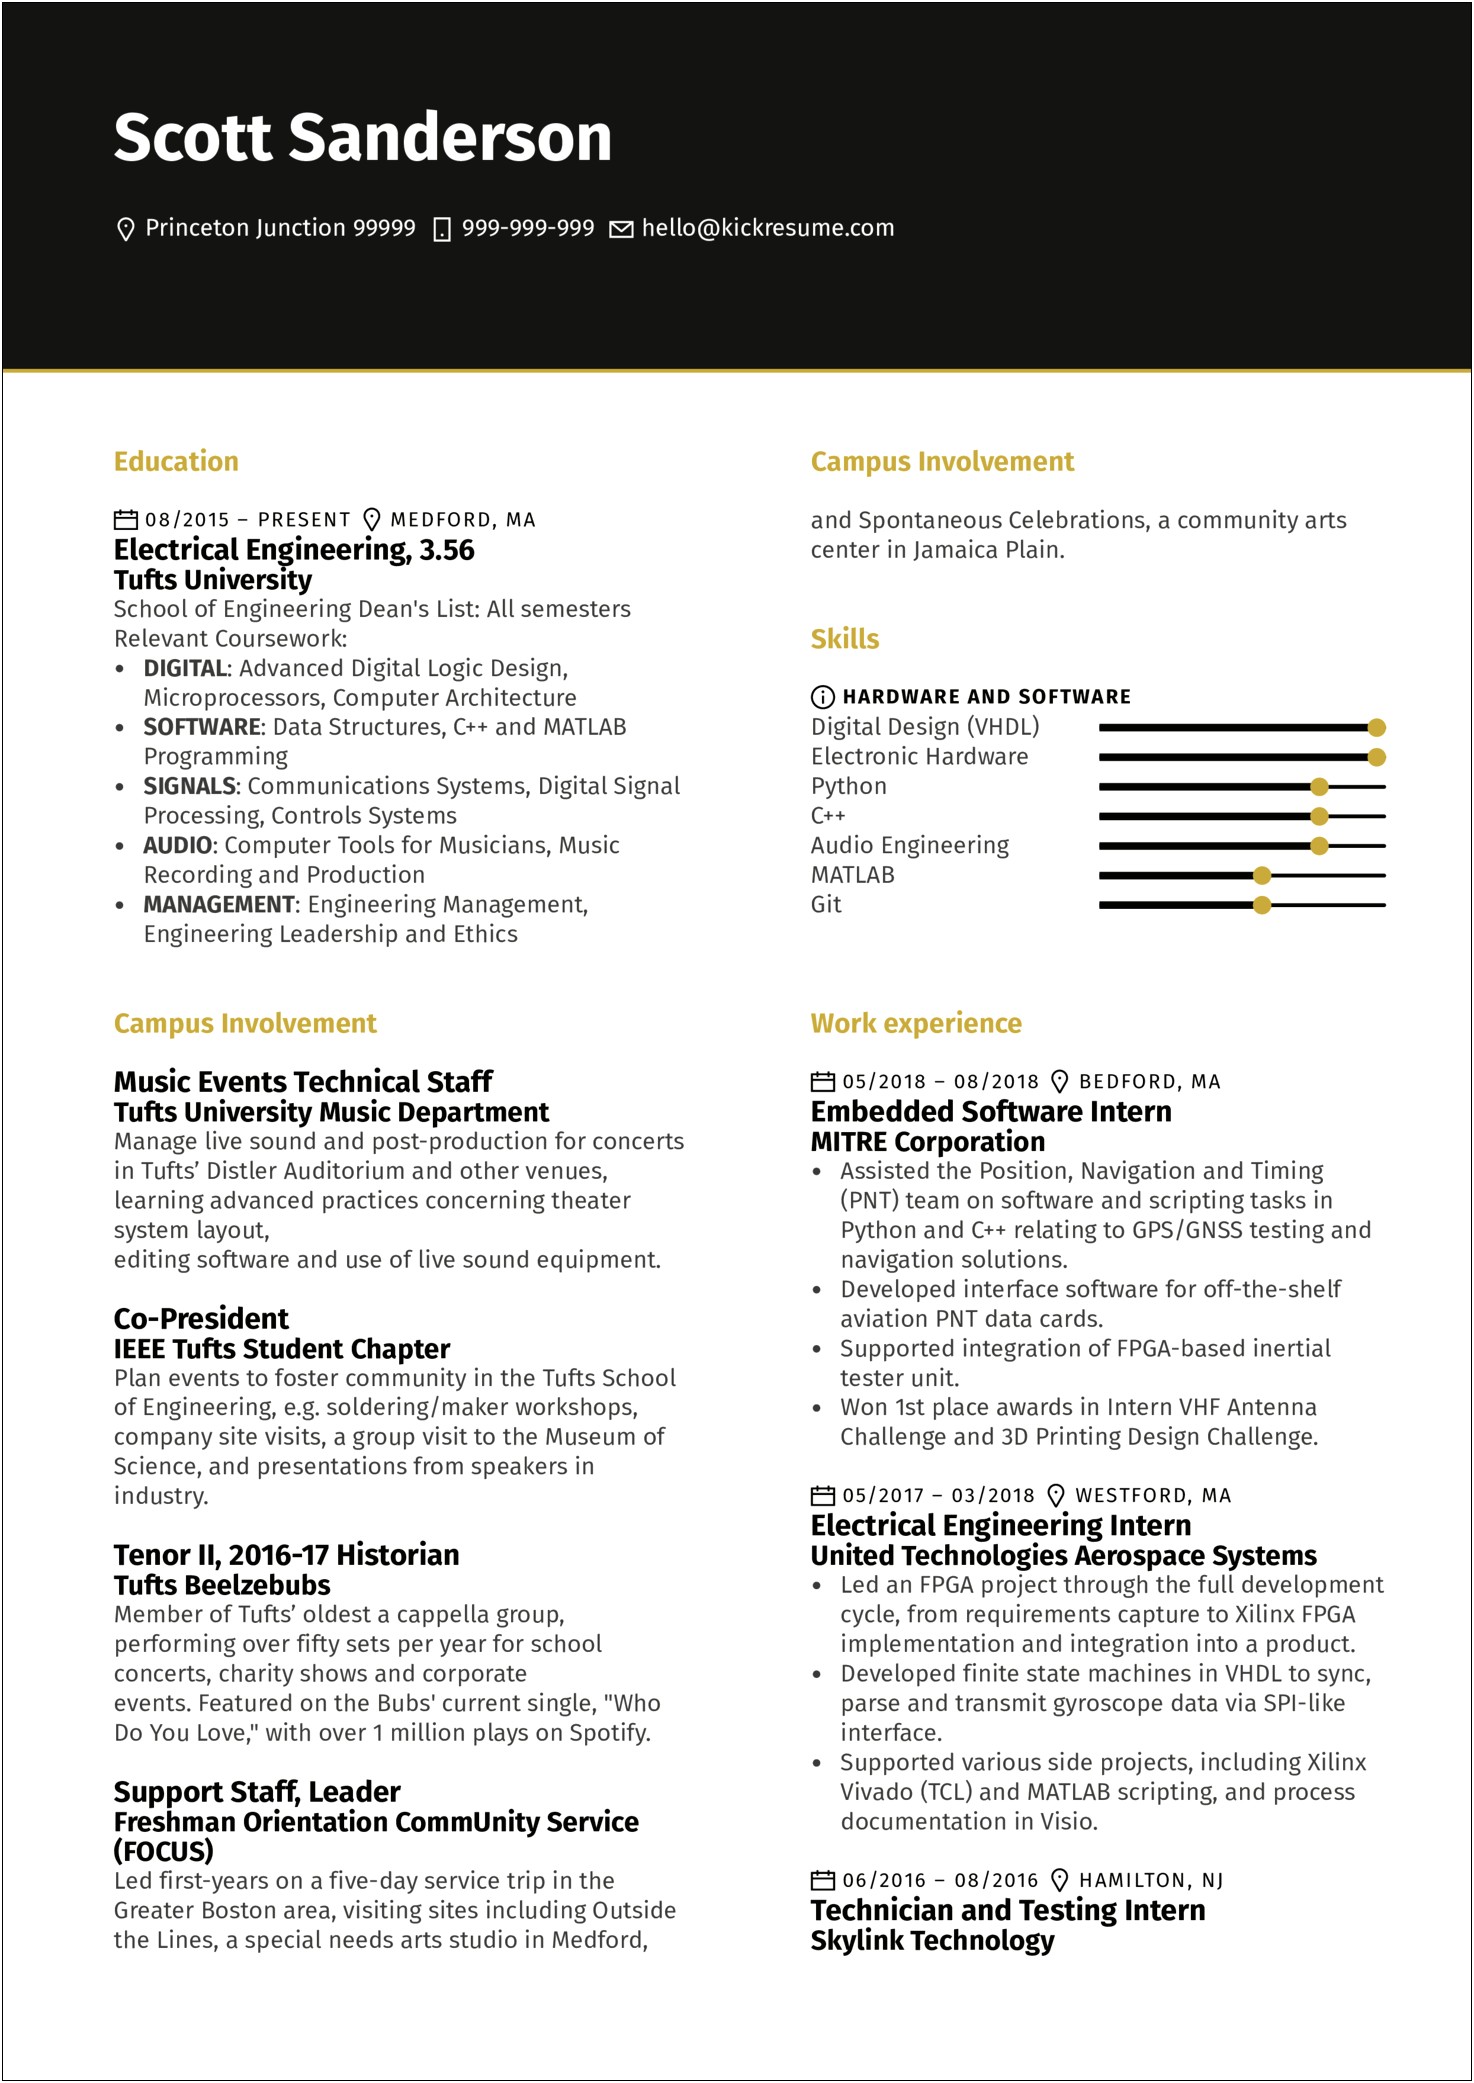 Software Engineer Student Resume Examples